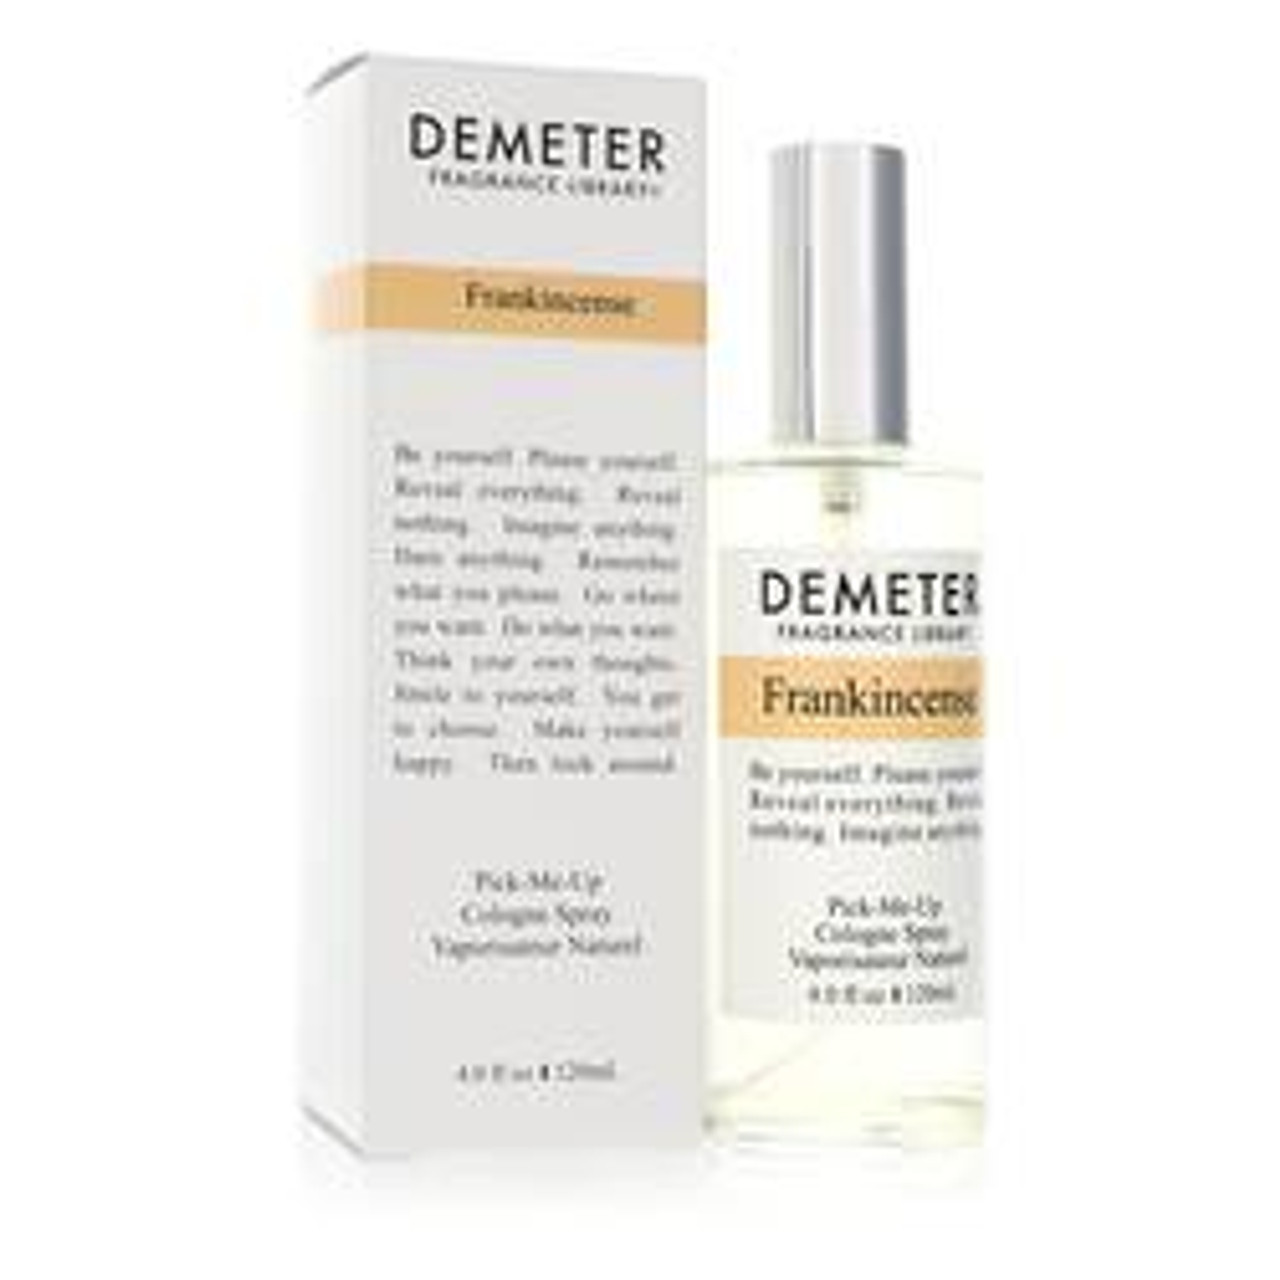 Demeter Frankincense Perfume By Demeter Cologne Spray (Unisex) 4 oz for Women - [From 79.50 - Choose pk Qty ] - *Ships from Miami